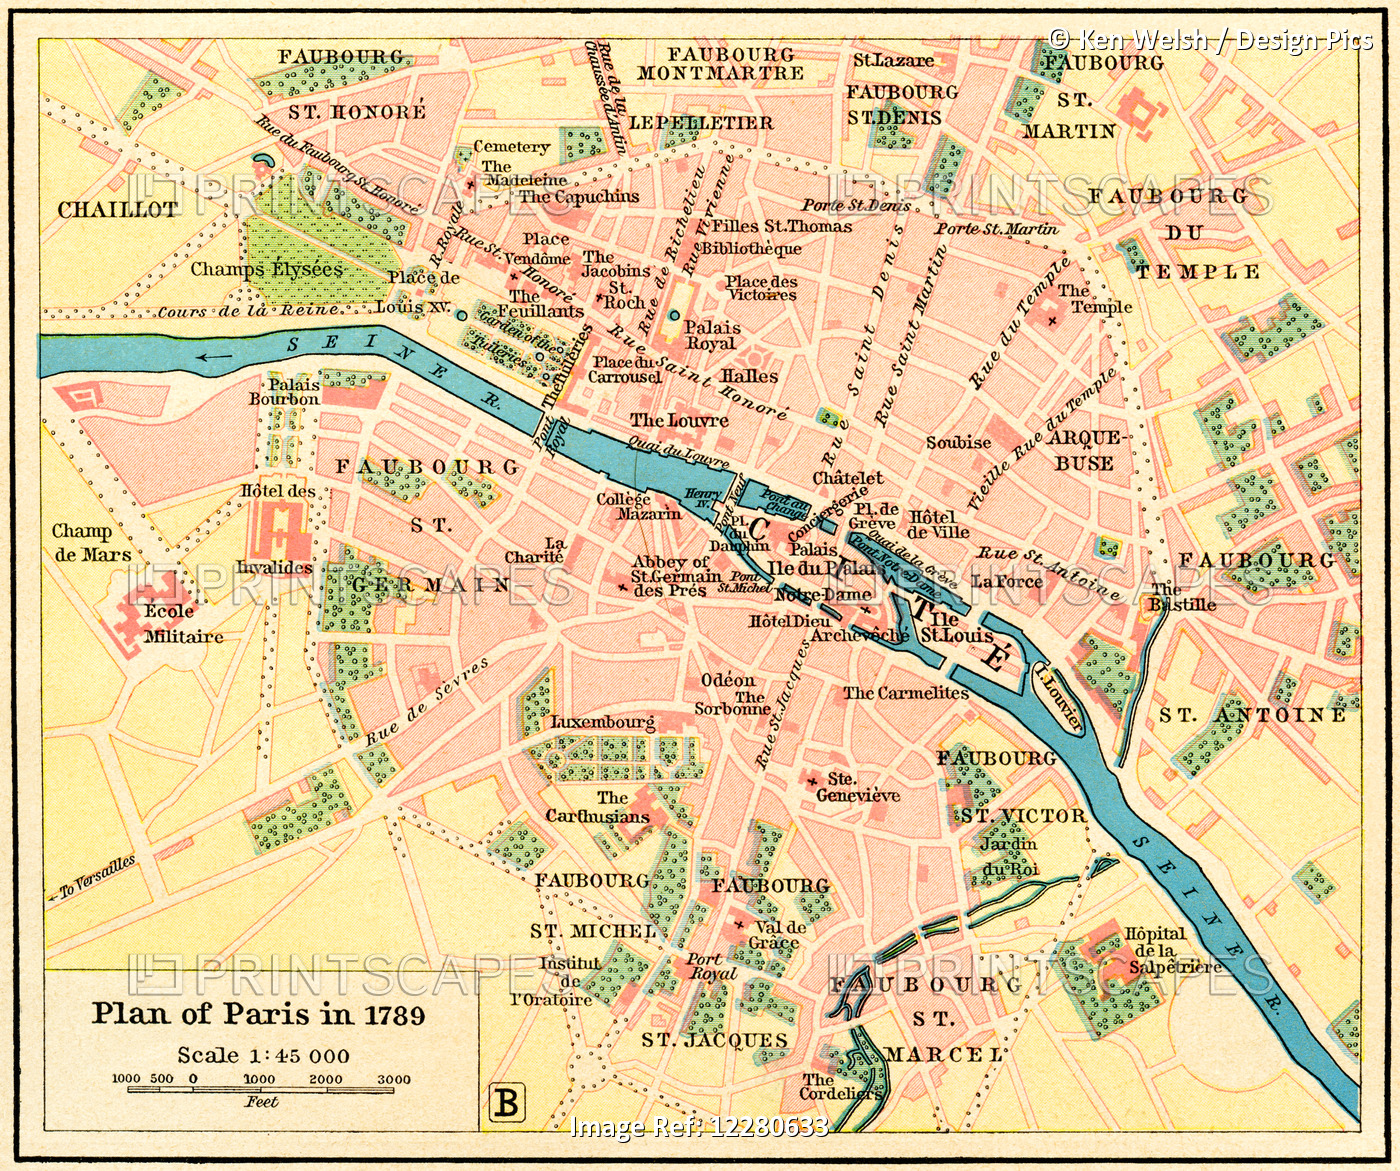 Plan Of Paris, France In 1789. From Historical Atlas, Published 1923.